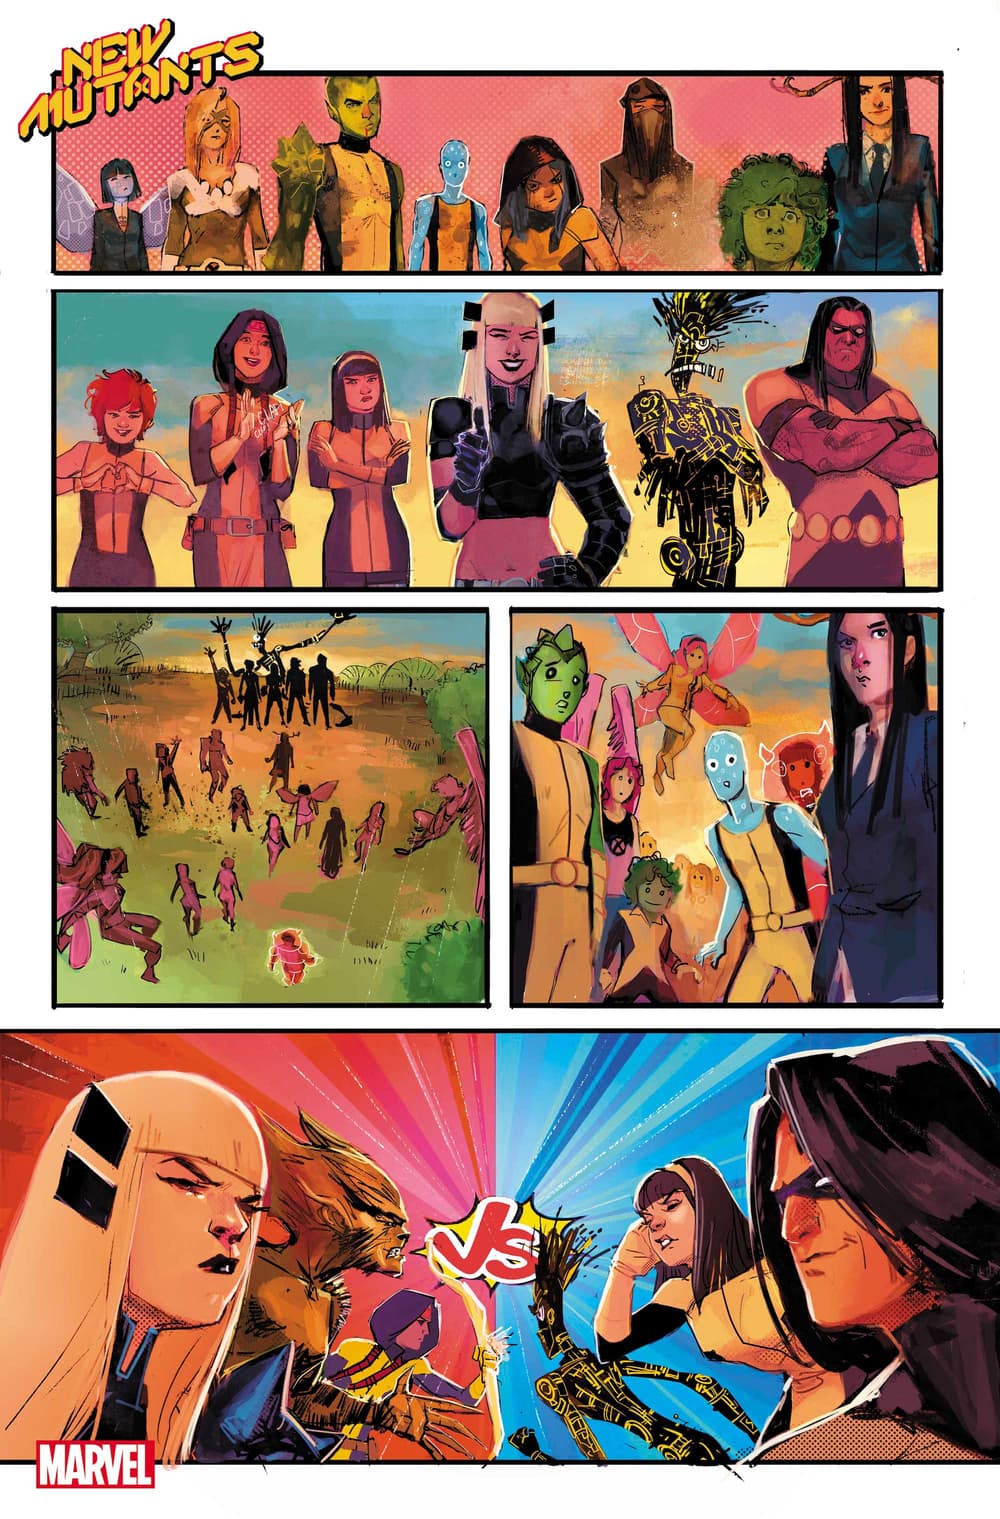 NEW MUTANTS #14 preview art by Rod Reis